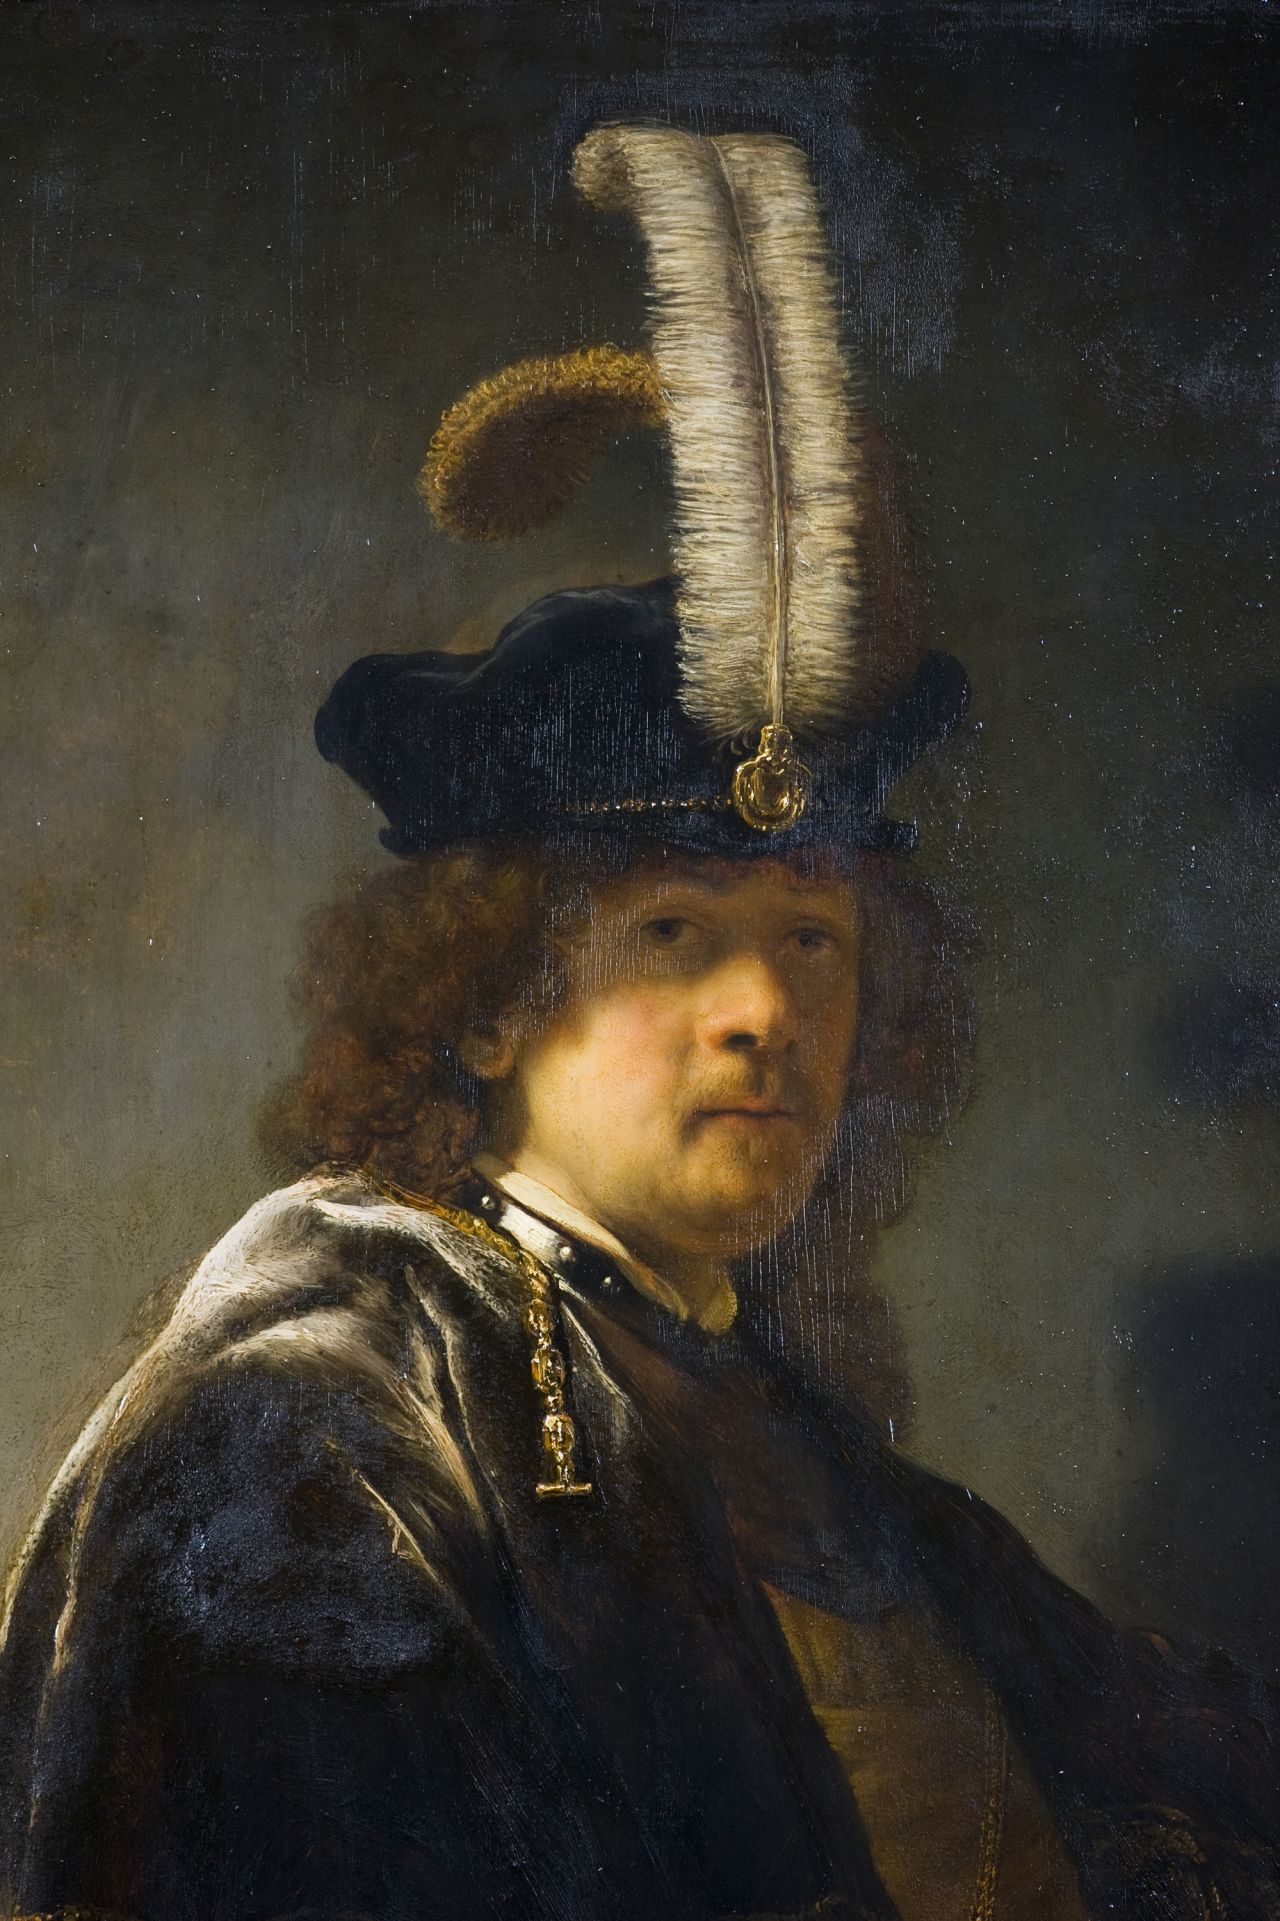 A Rembrandt self-portrait, pictured here on display at Britain's Buckland Abbey, was only revealed to be the Dutch master's work in 2013.